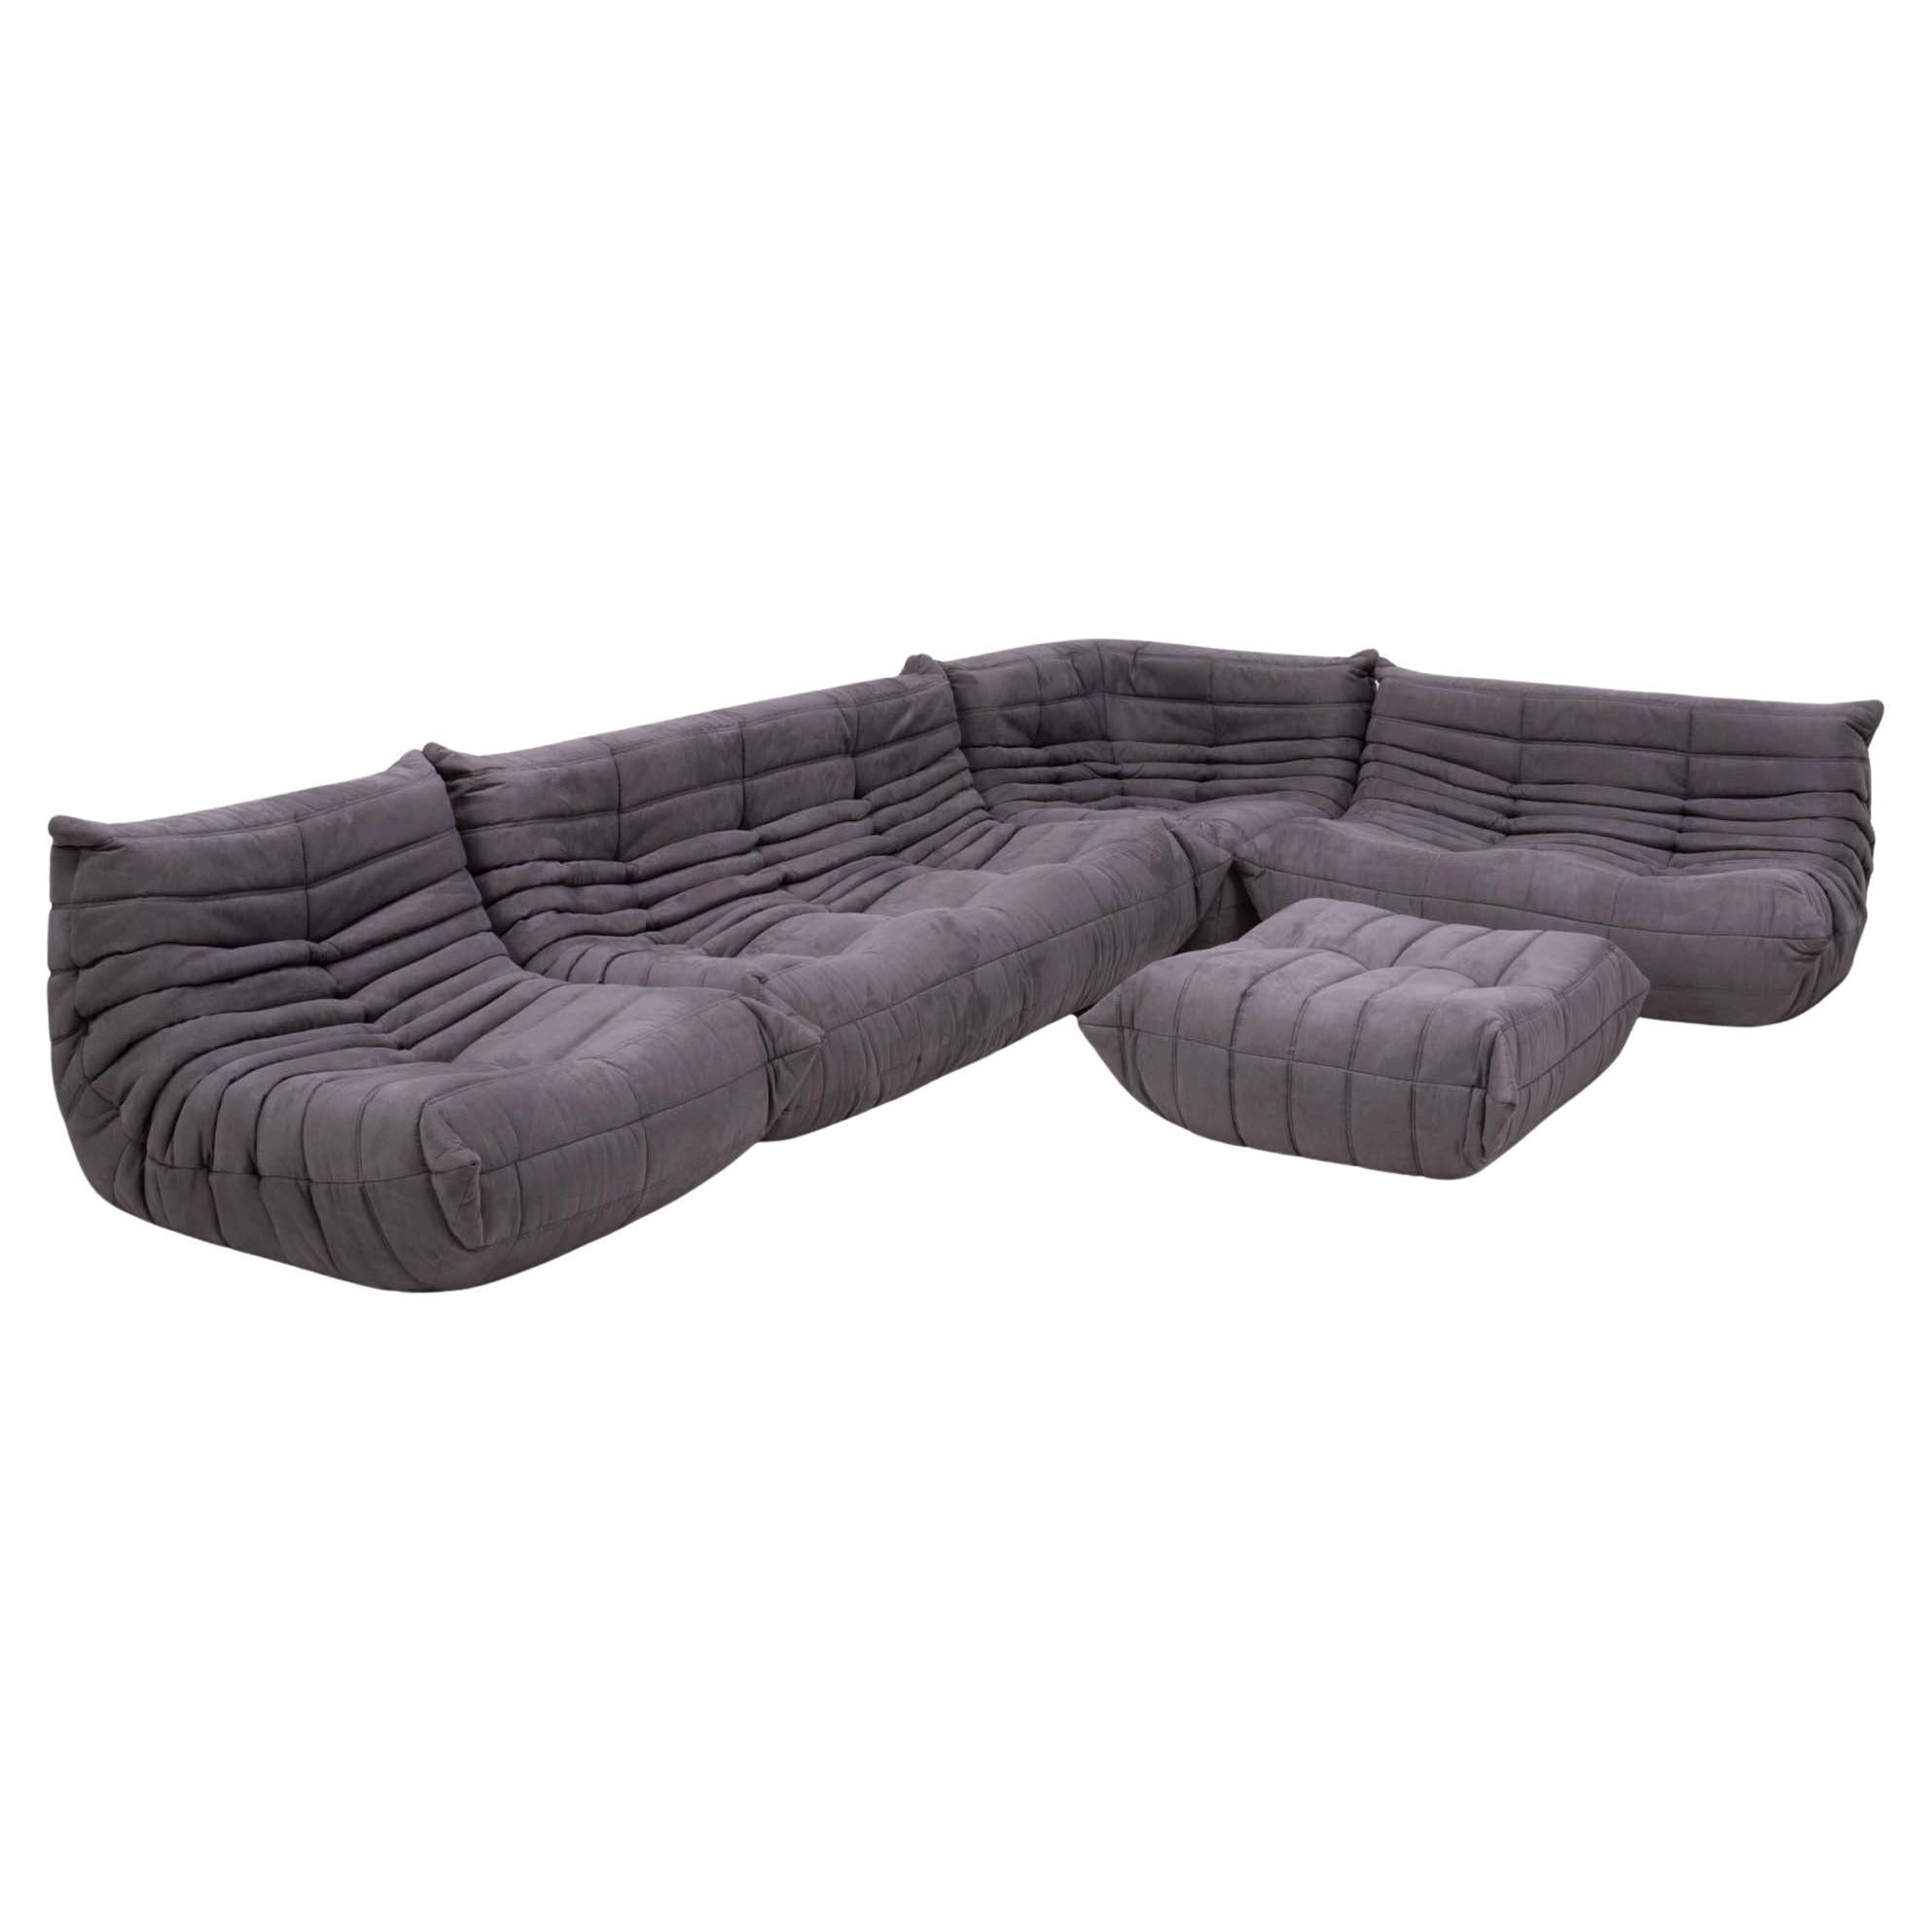 Togo Grey Modular Sofa and Footstool by Michel Ducaroy for Ligne Roset, Set of 5 For Sale